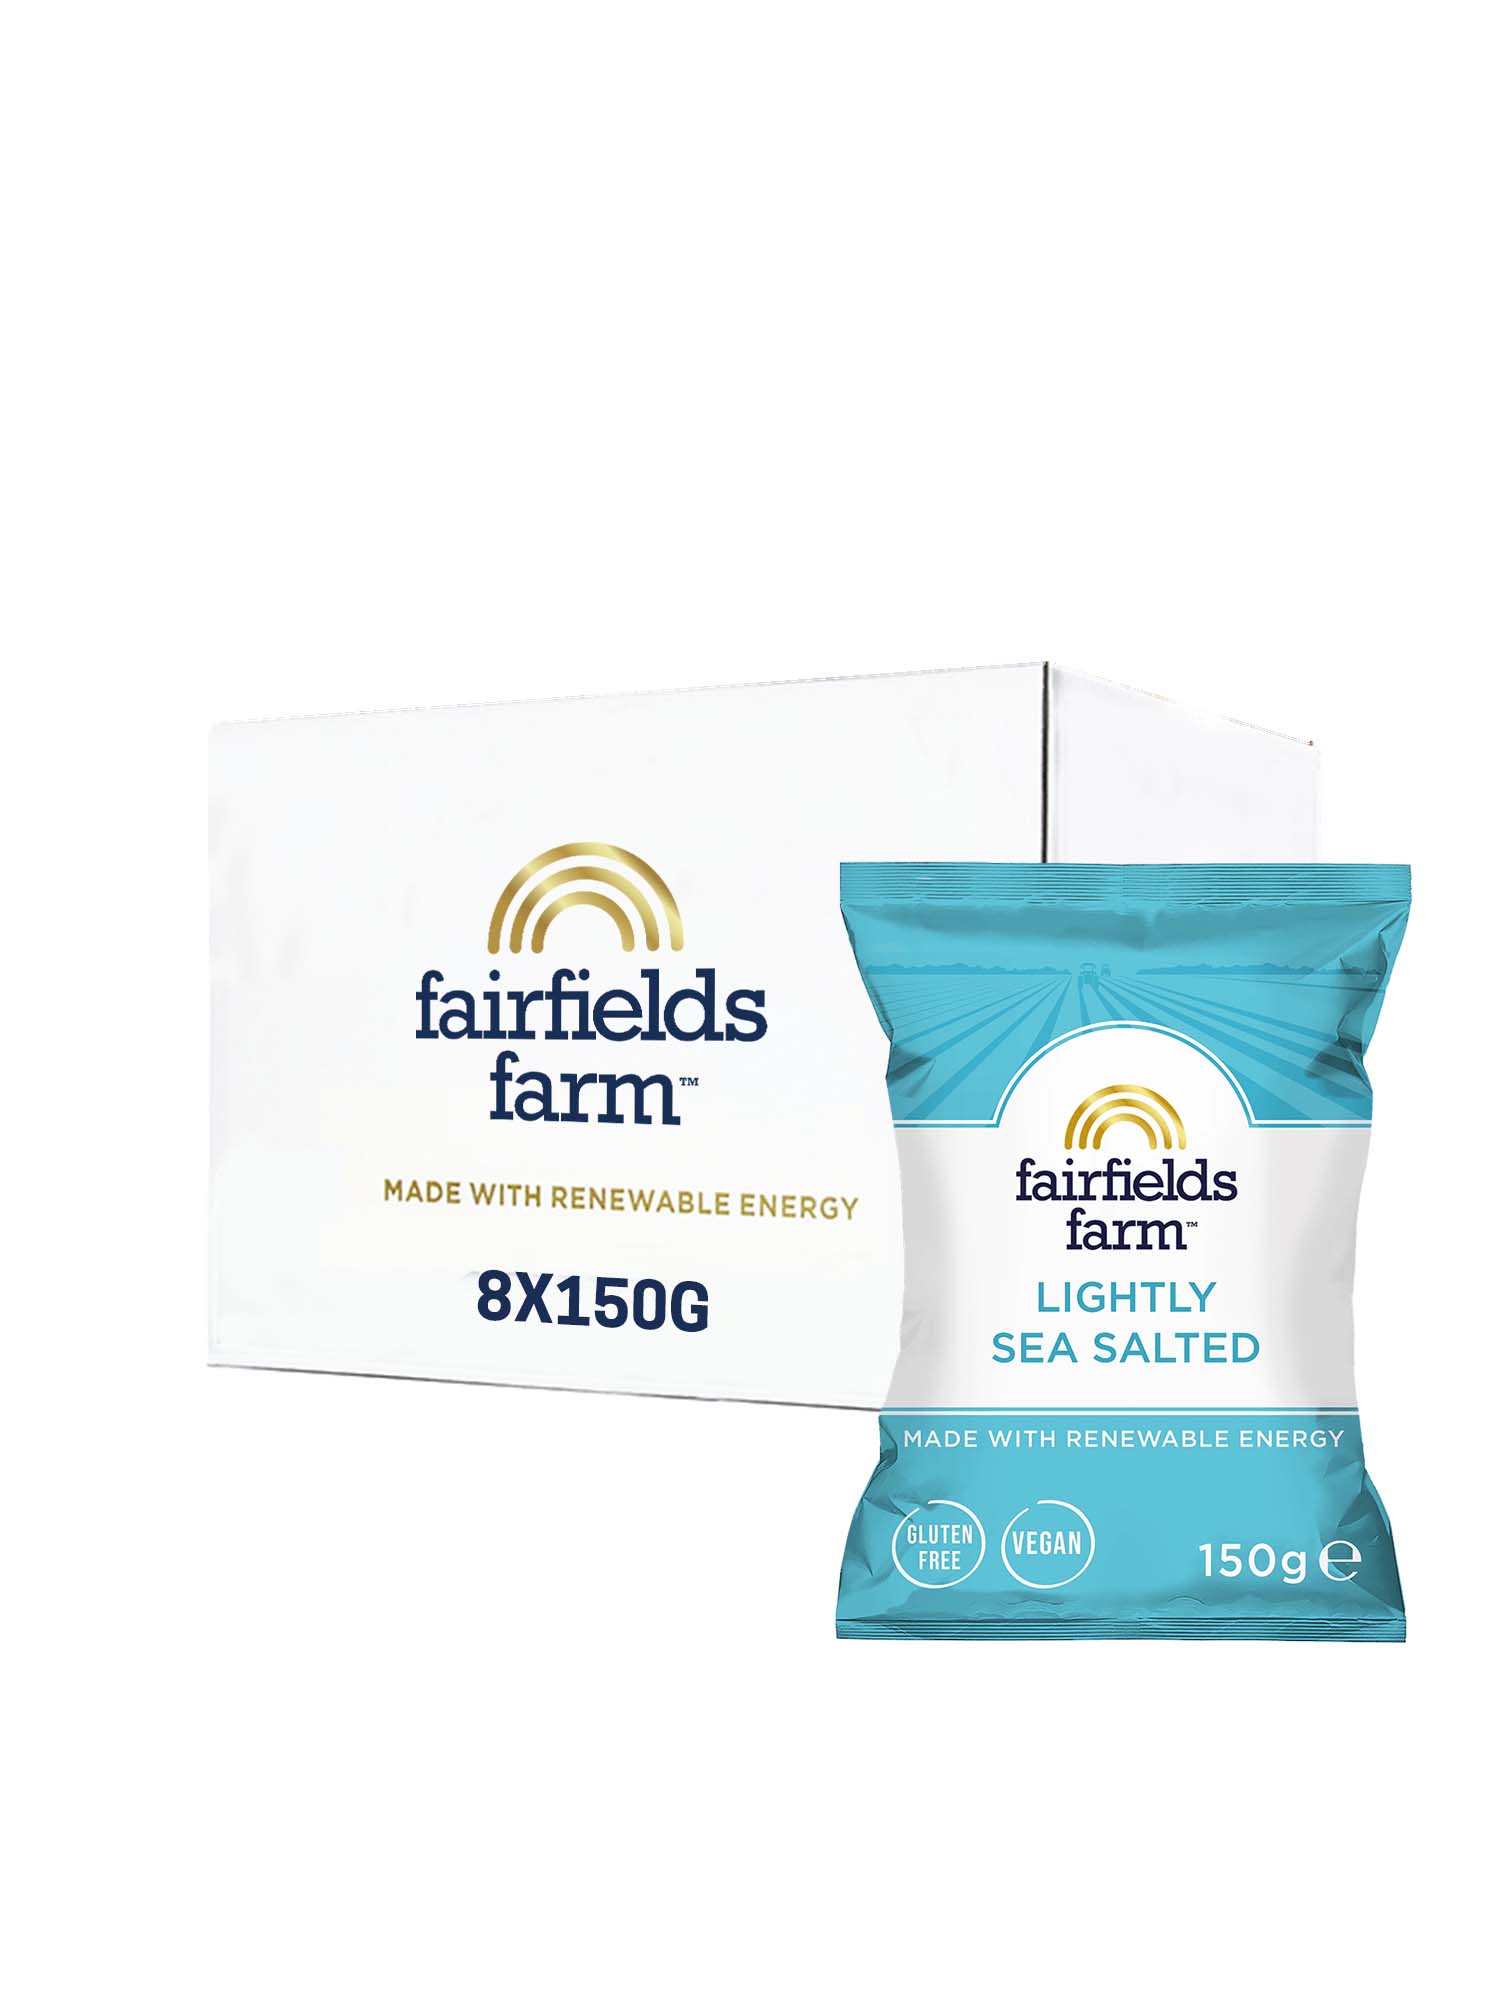 Lightly Sea Salted – 8 x 150g bags